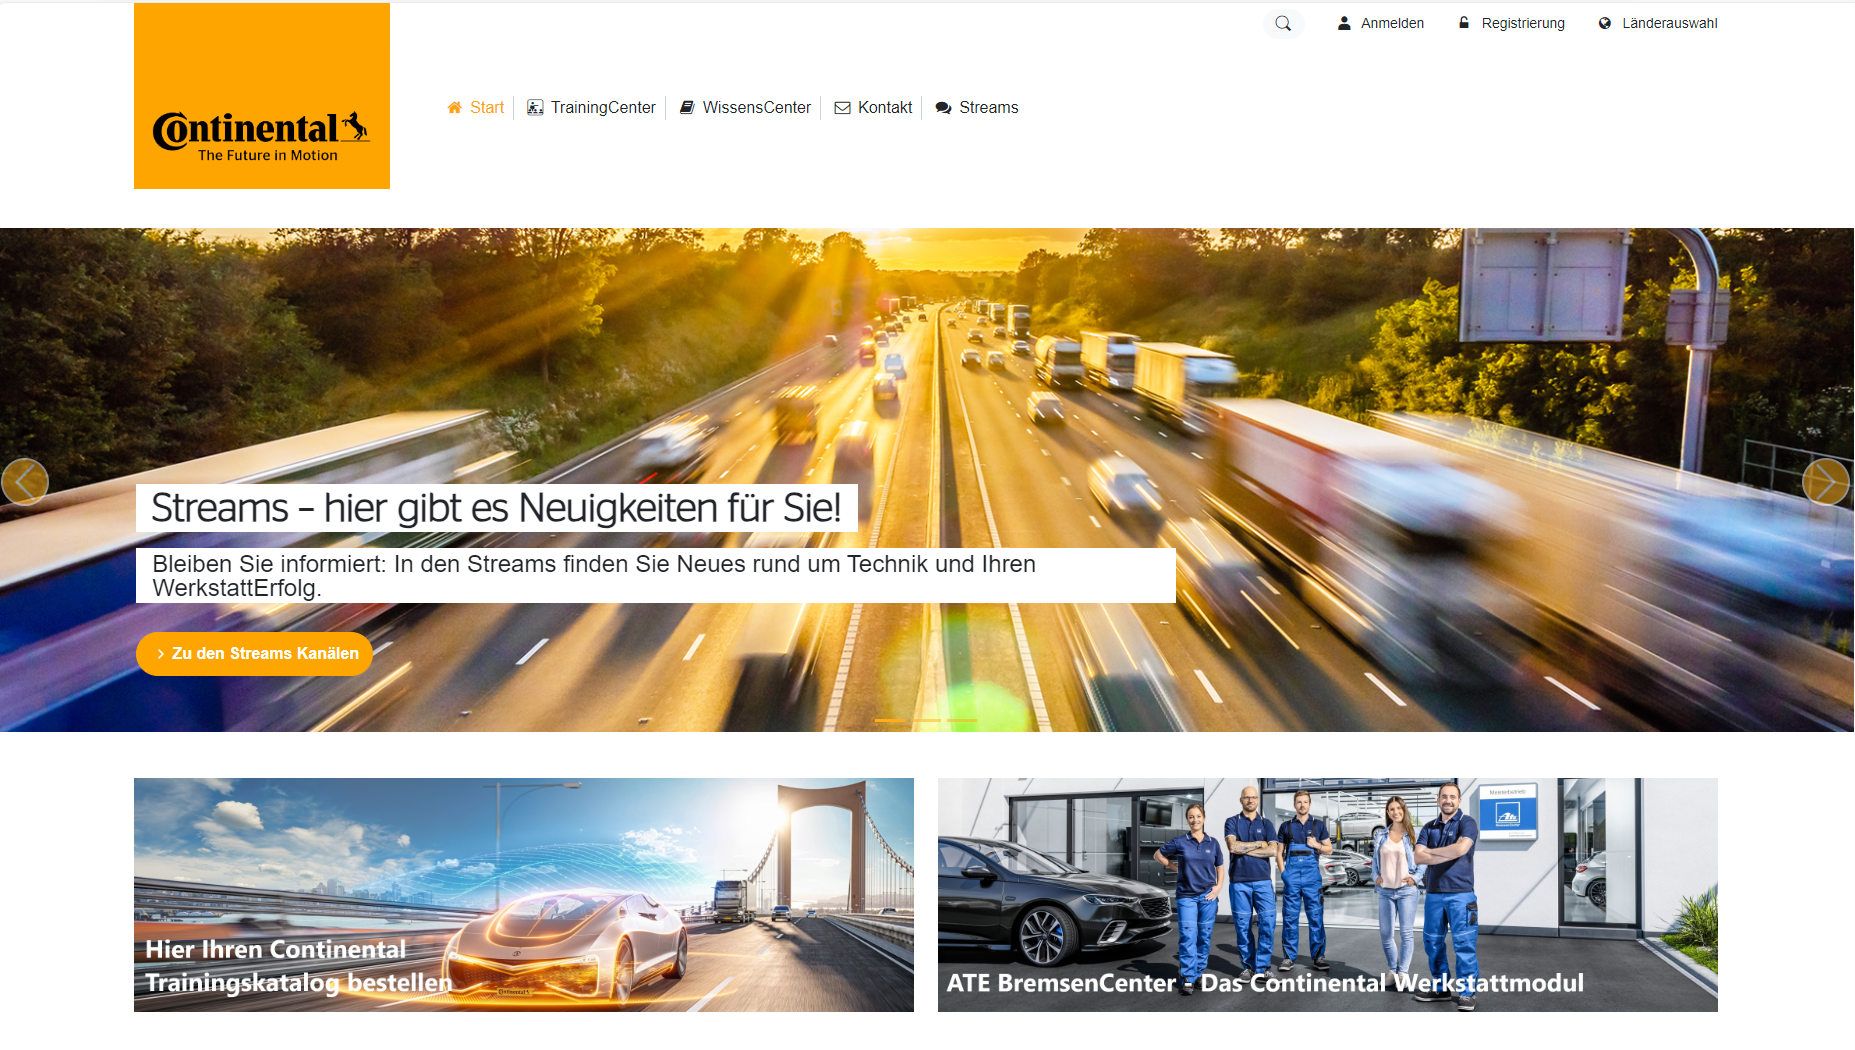 The Continental Corporation is a leading global automotive supplier that uses hiveQ to train customers and partners in pioneering technologies and services.